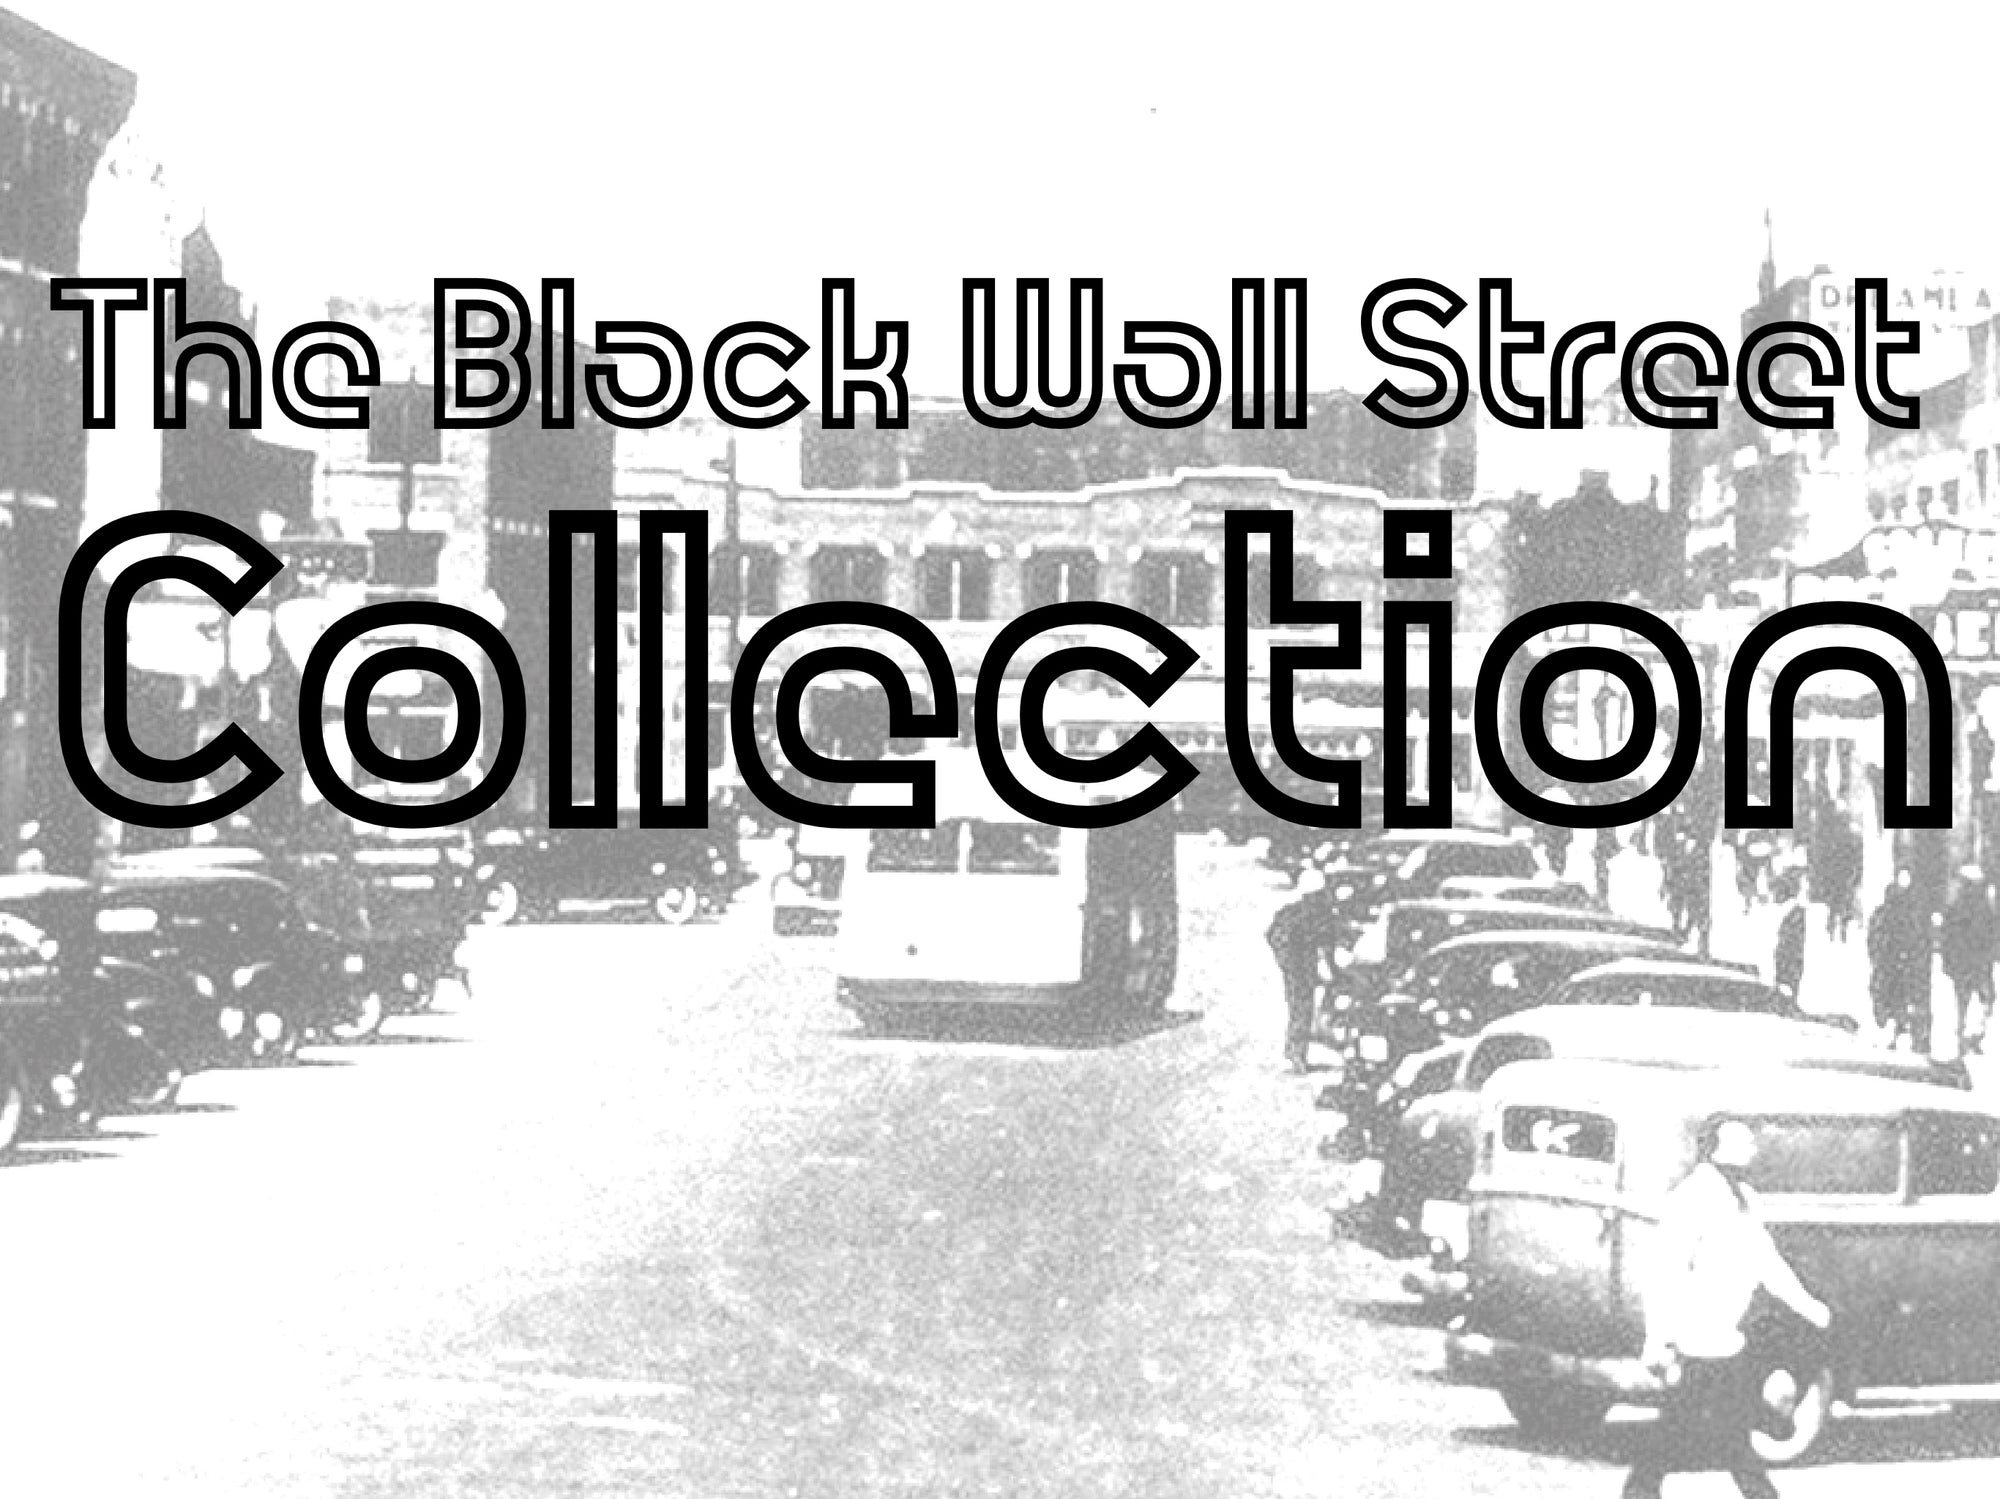 The Black Wall Street Collection